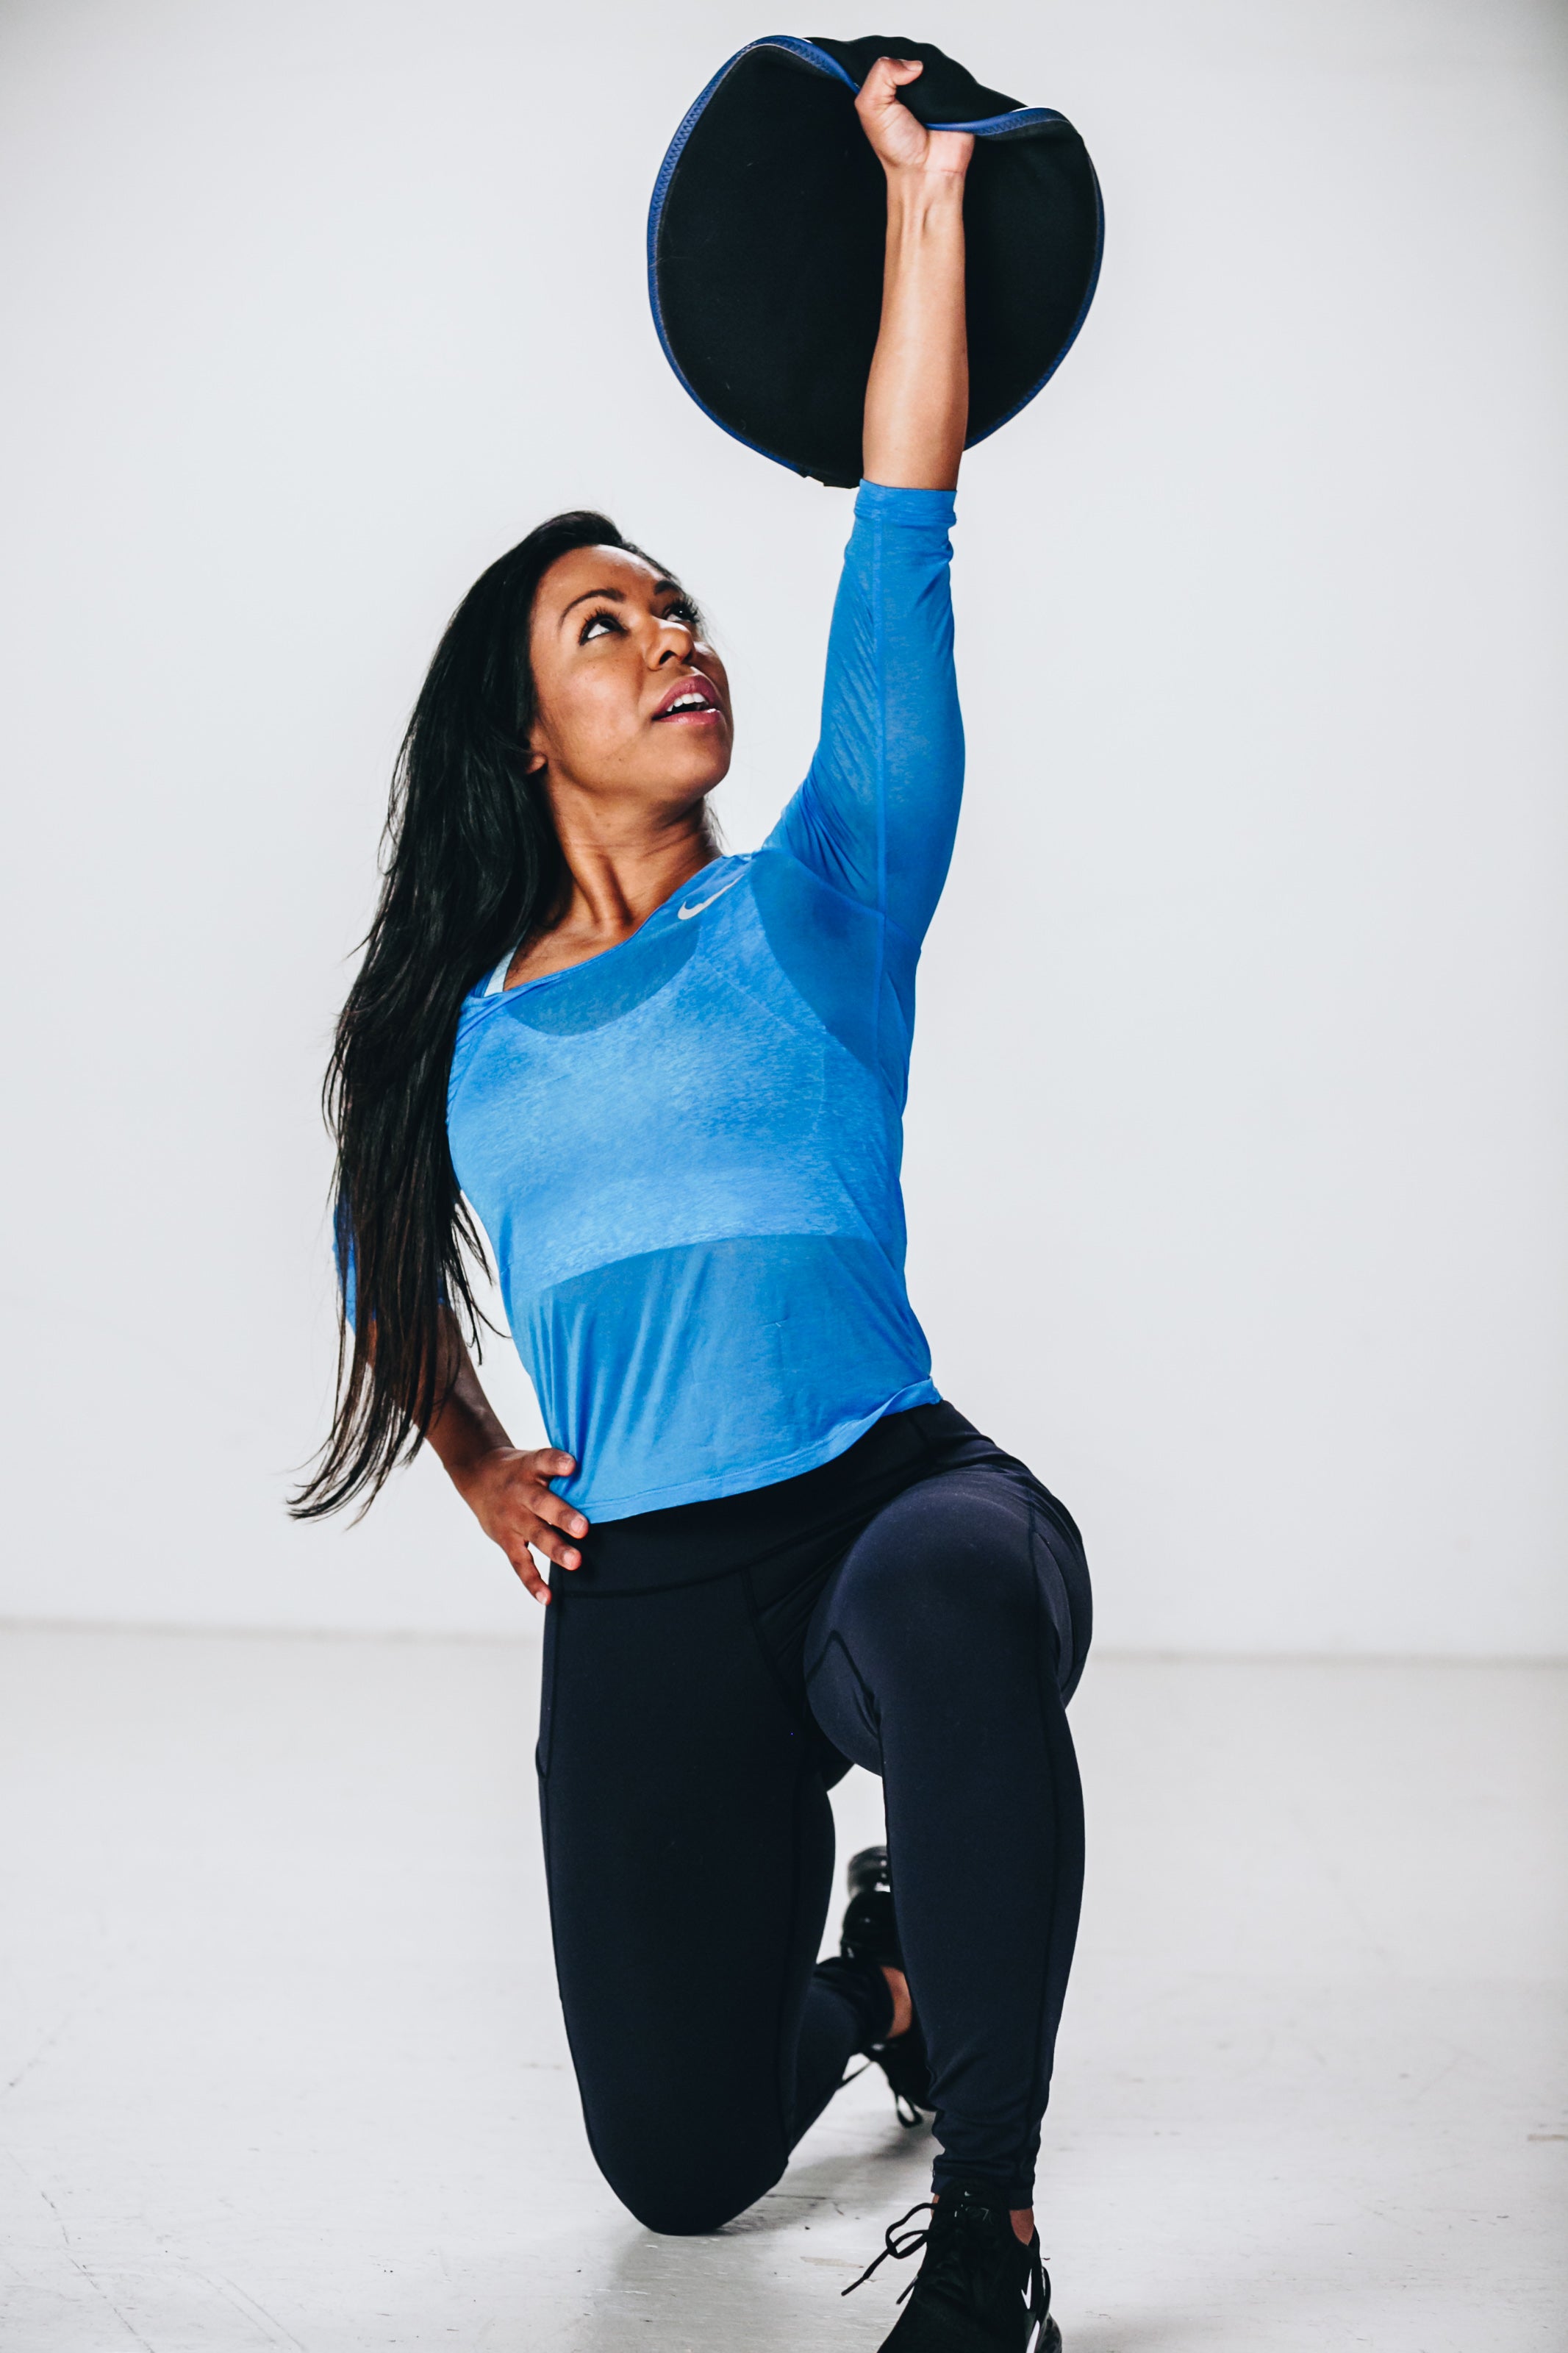 picture of female fitness model executing a lunge while holding sandbell fitness sandbag overhead with arm fully extended